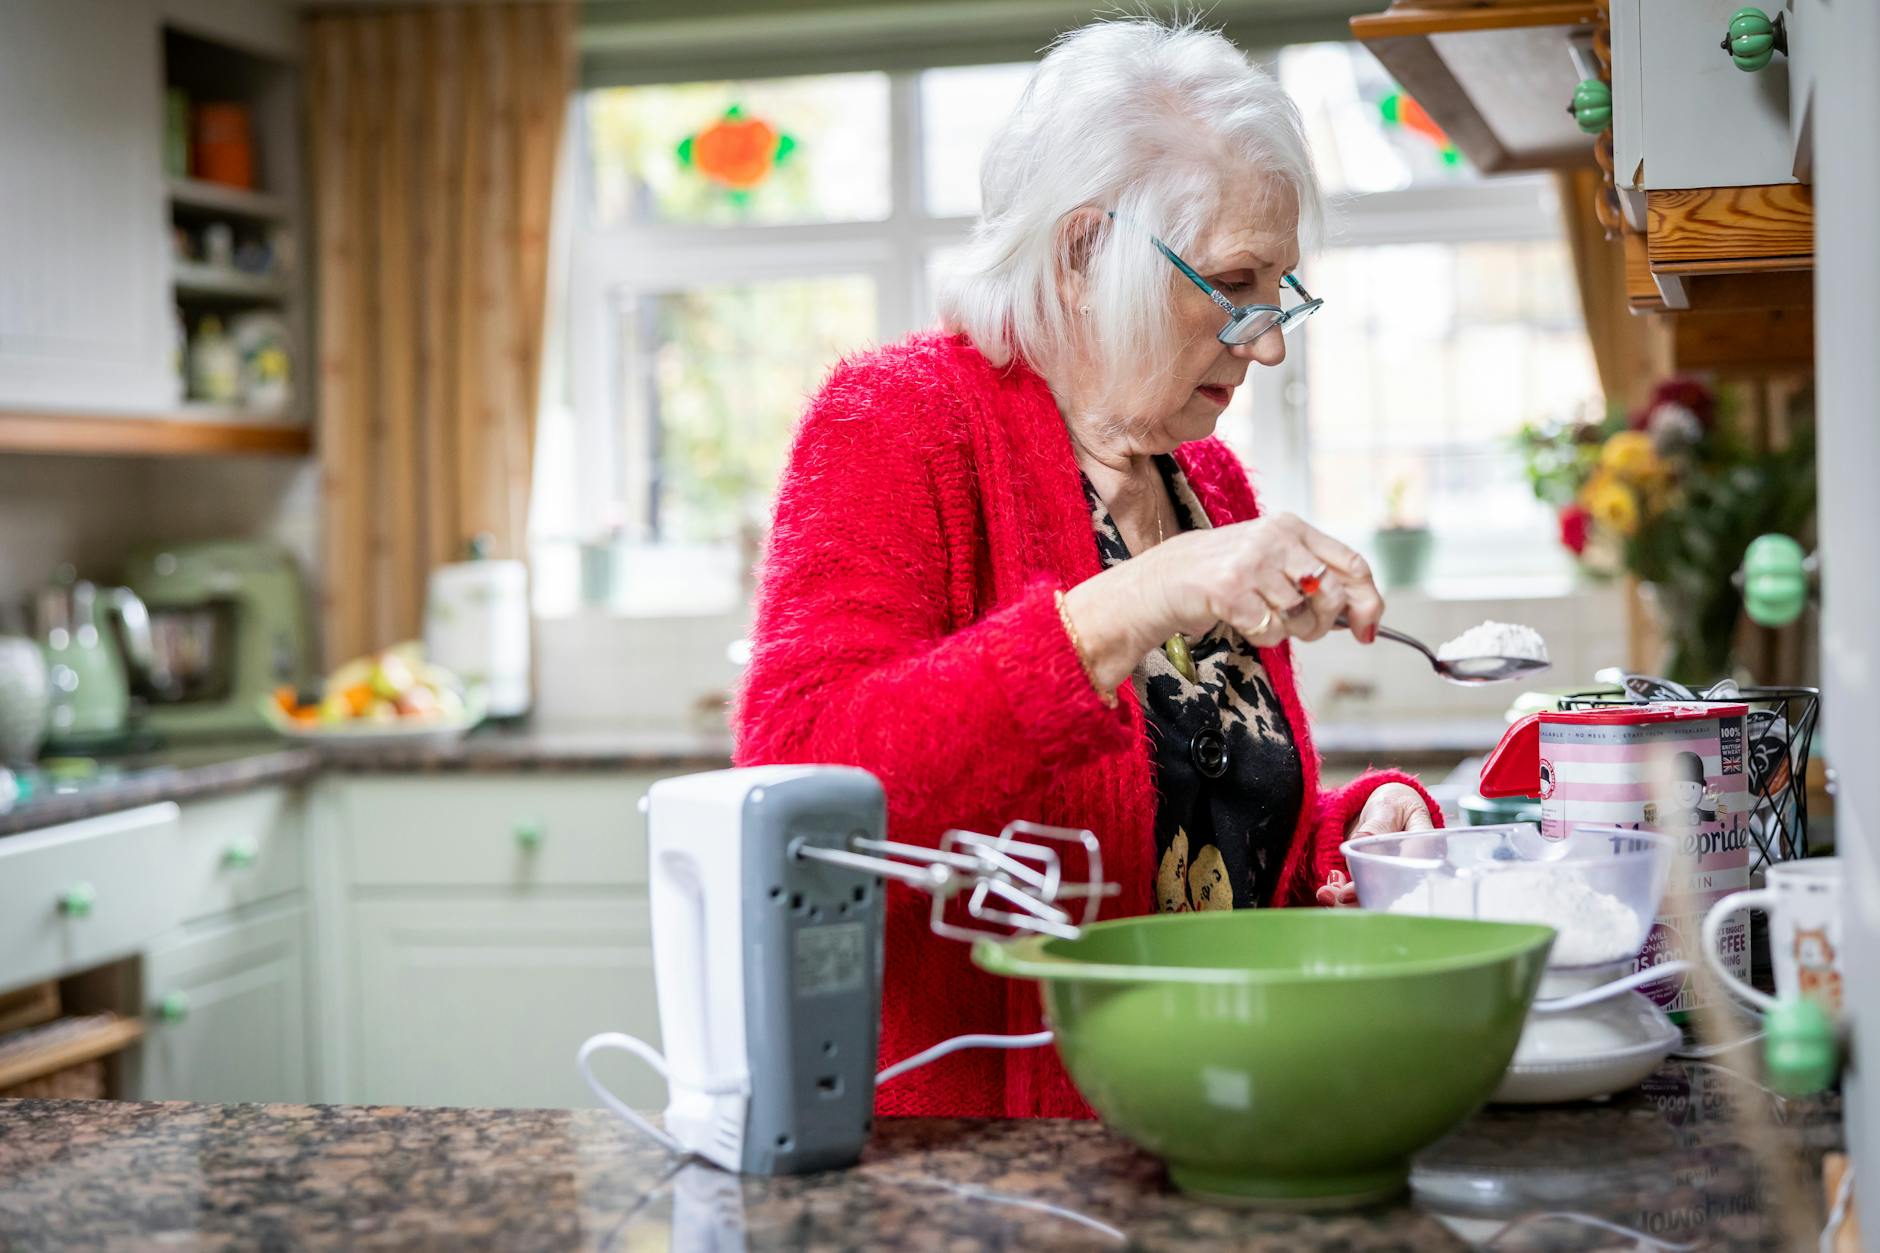 An older woman is cooking in the kitchen